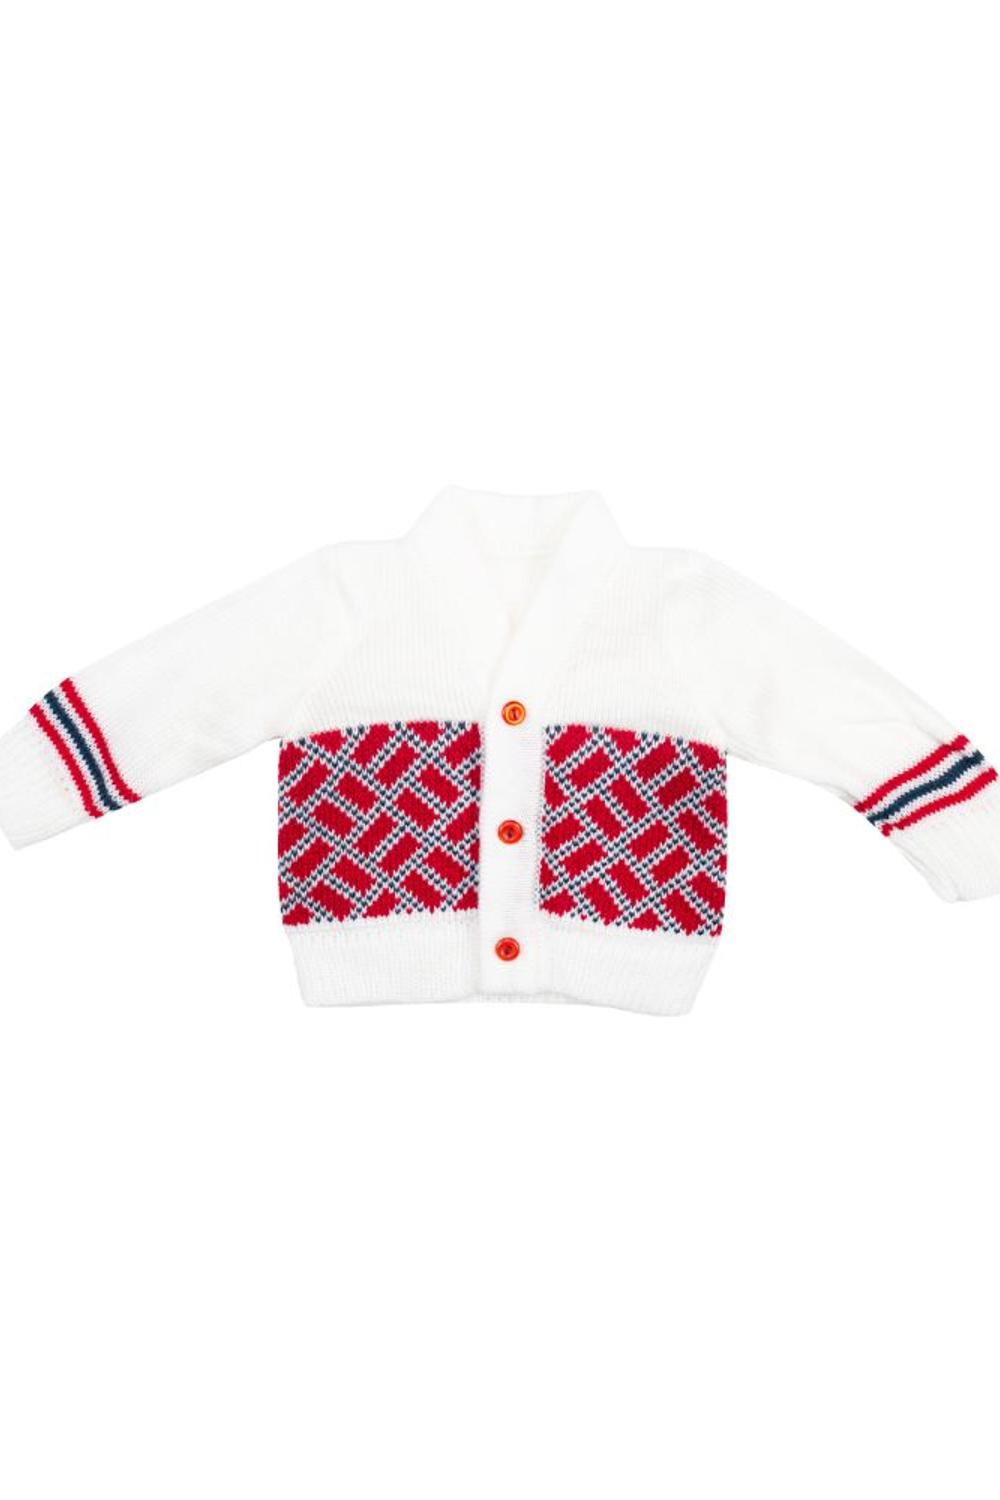 Mee Mee Baby Sweater Sets Red_Offwhite